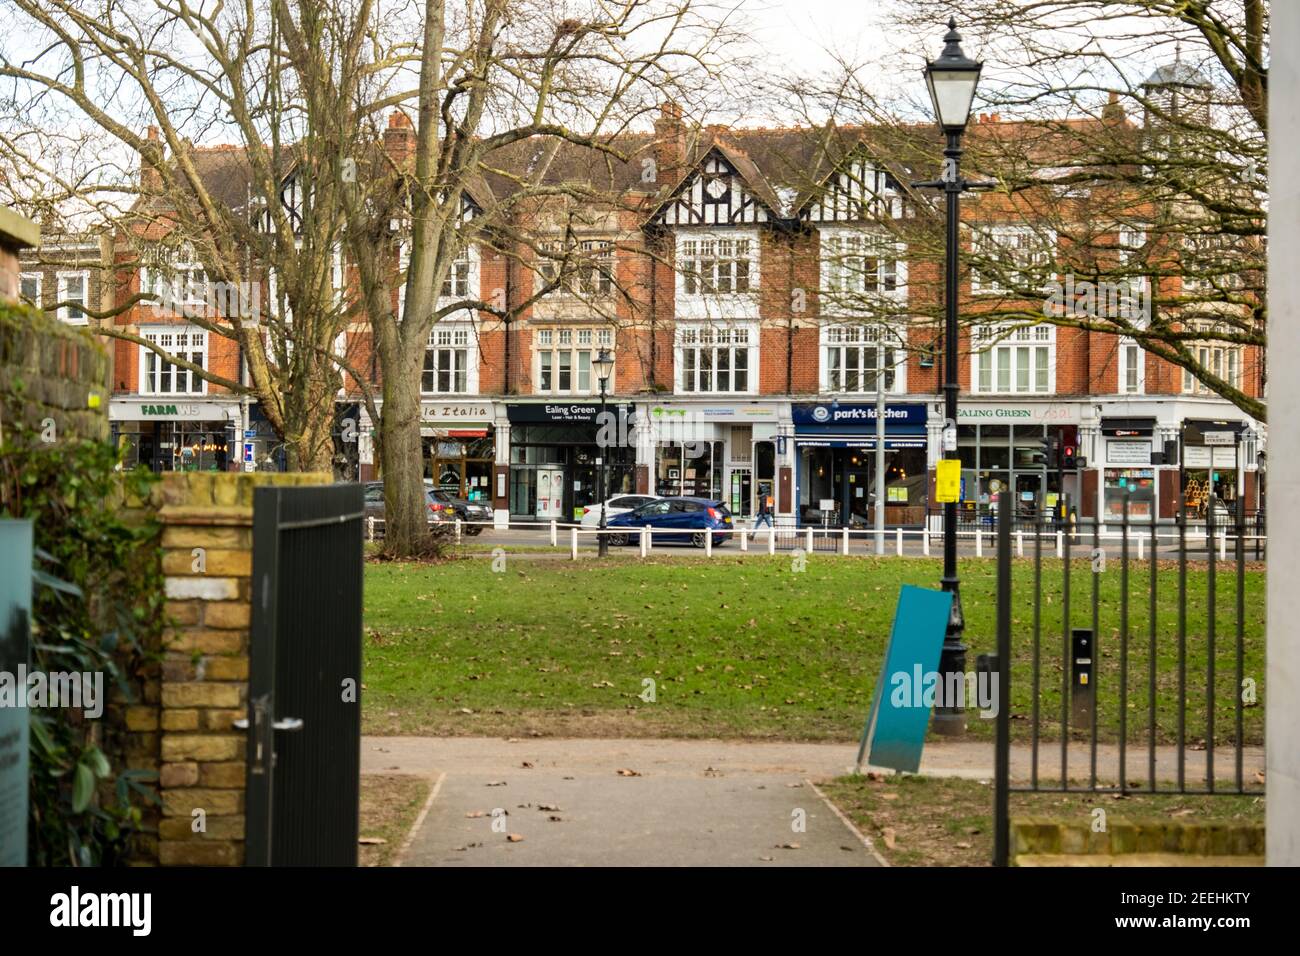 London- Small local independent shops on Ealing Green , Ealing Broadway in West London Stock Photo